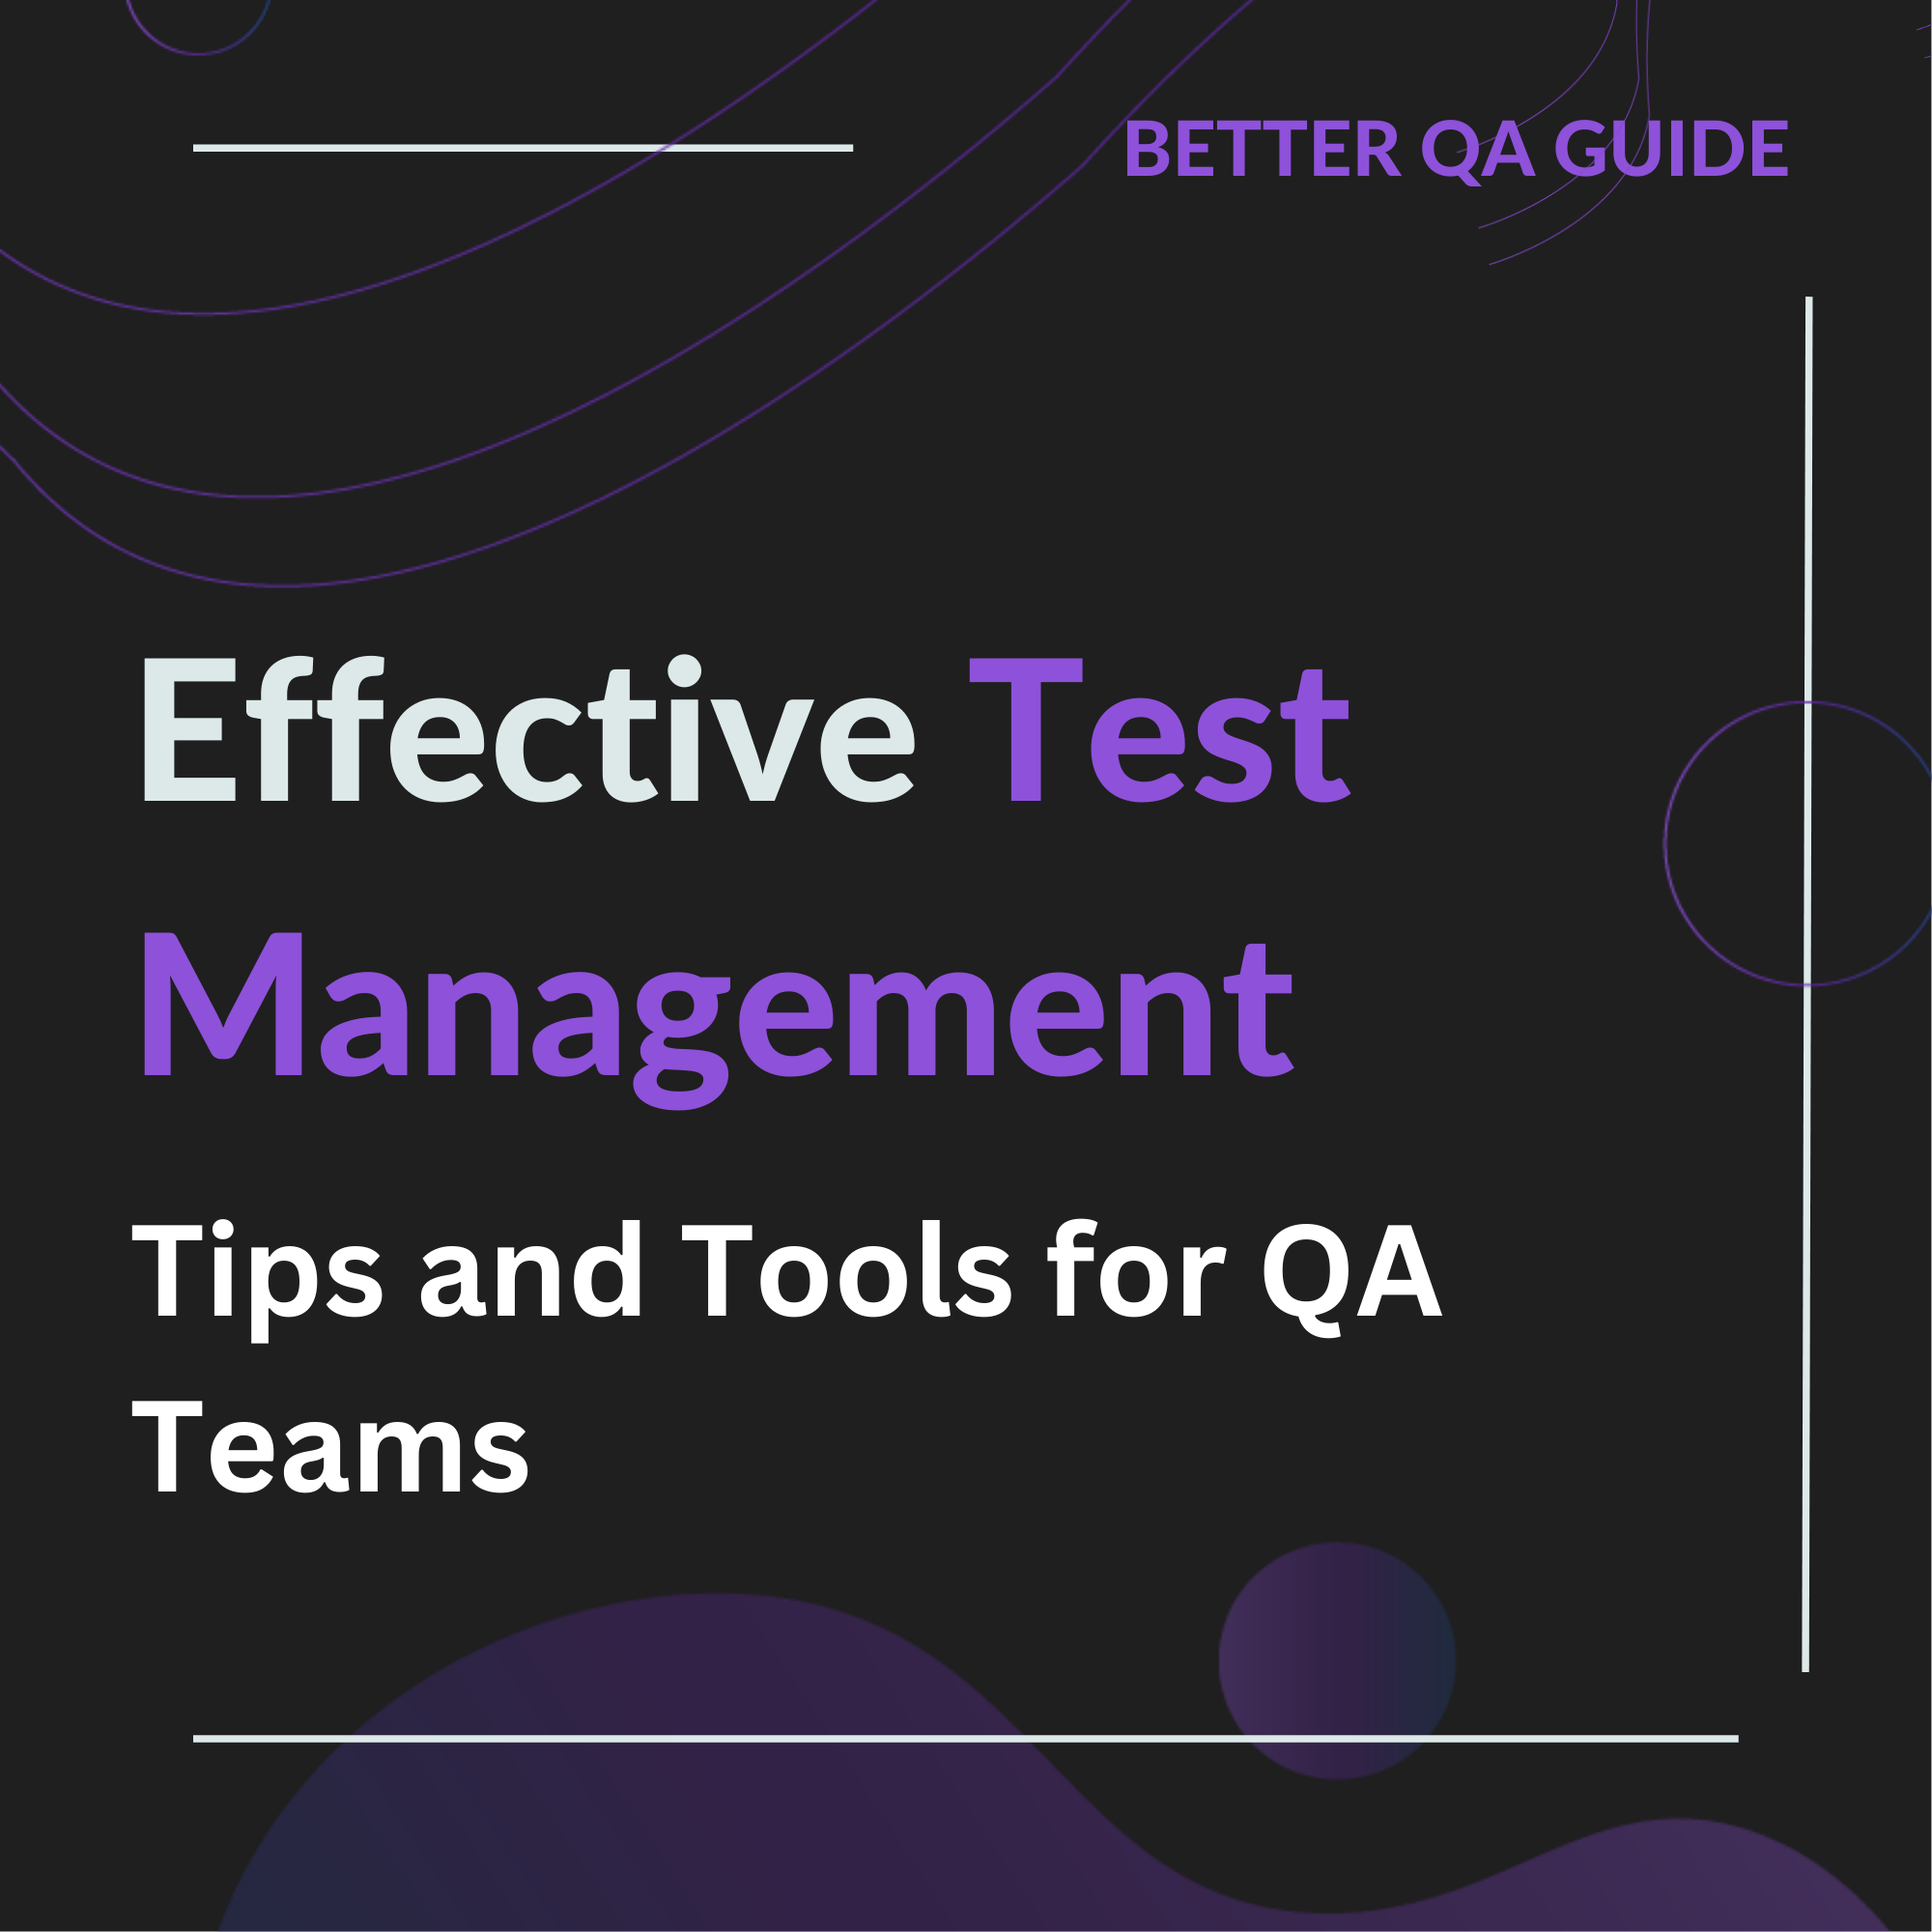 Effective Test Management Tips and Tools for QA Teams